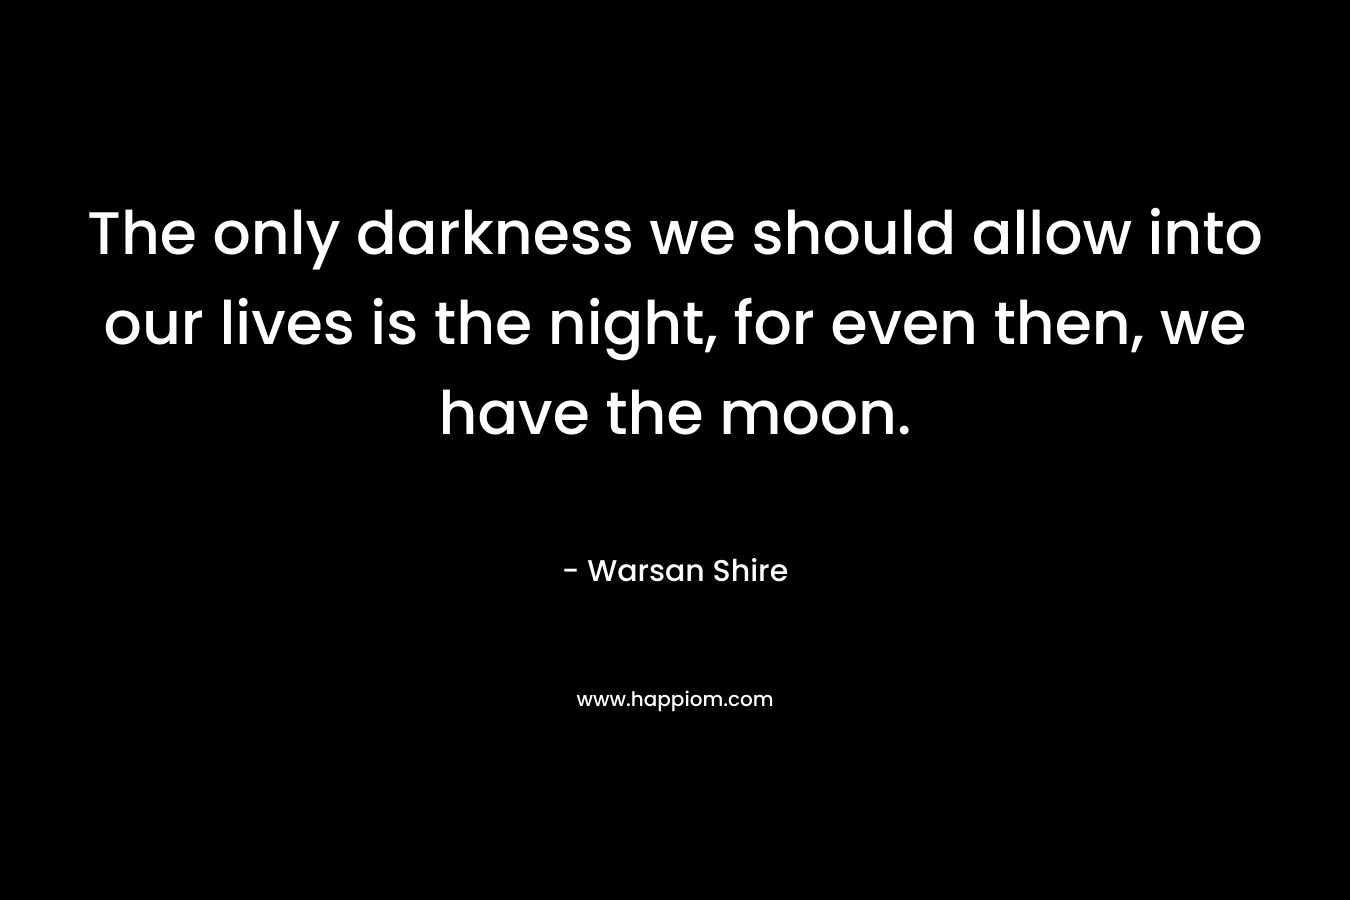 The only darkness we should allow into our lives is the night, for even then, we have the moon. – Warsan Shire